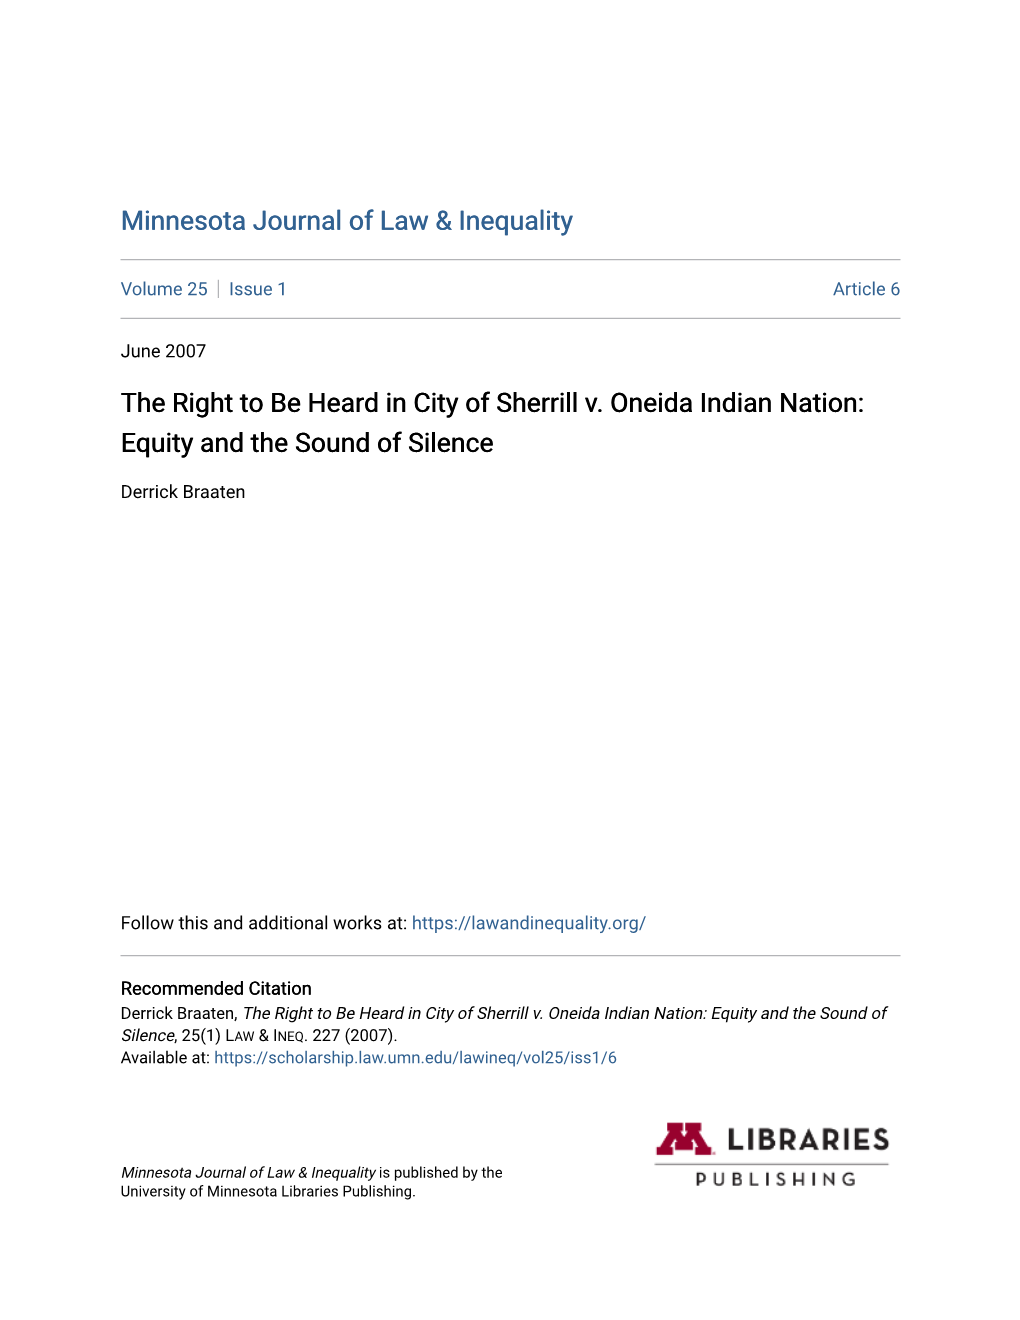 The Right to Be Heard in City of Sherrill V. Oneida Indian Nation: Equity and the Sound of Silence